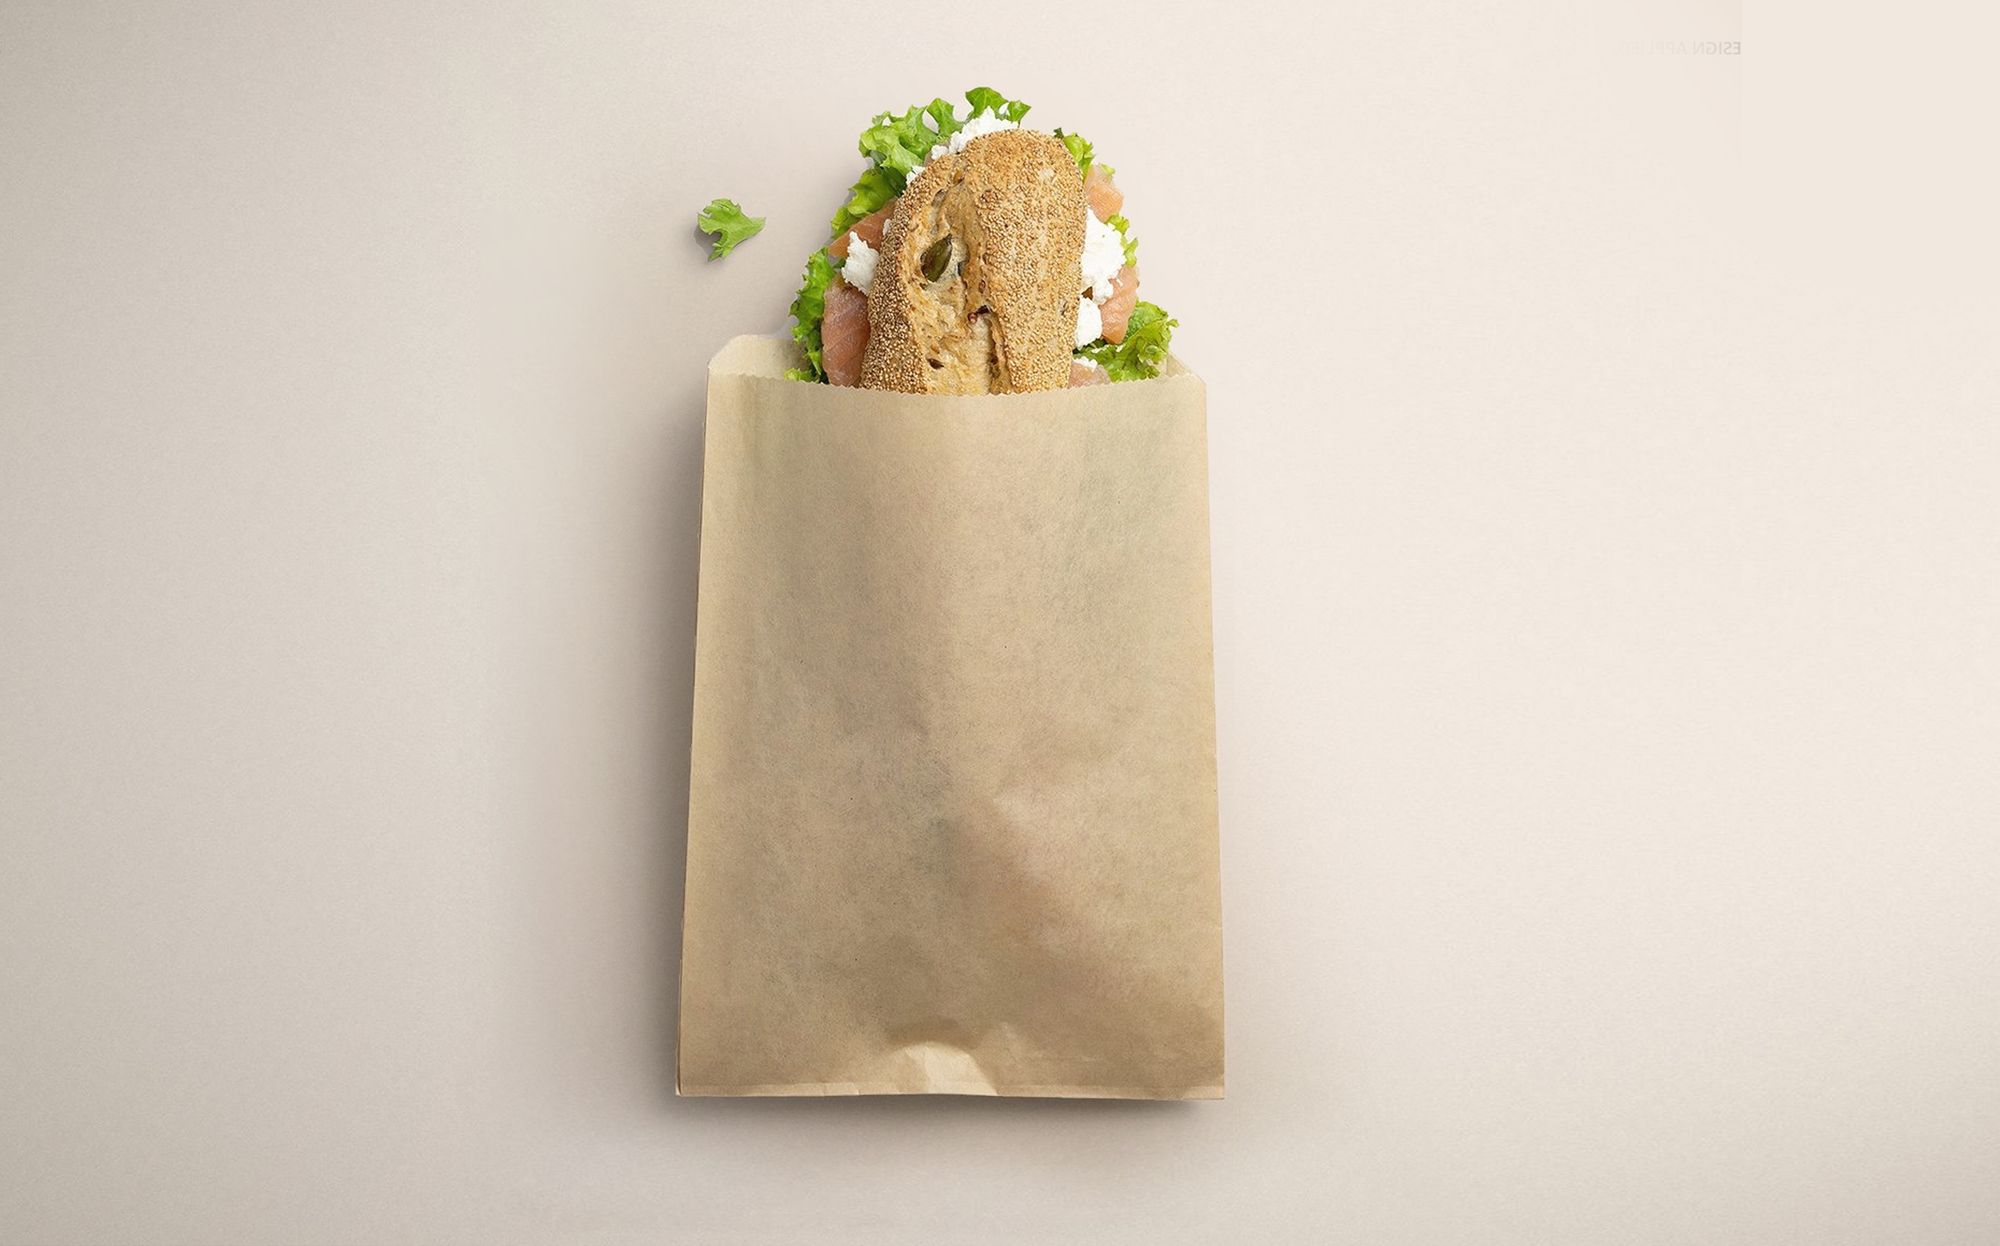 Reasons to Never Use Plastic Sandwich Bags Again as a Business